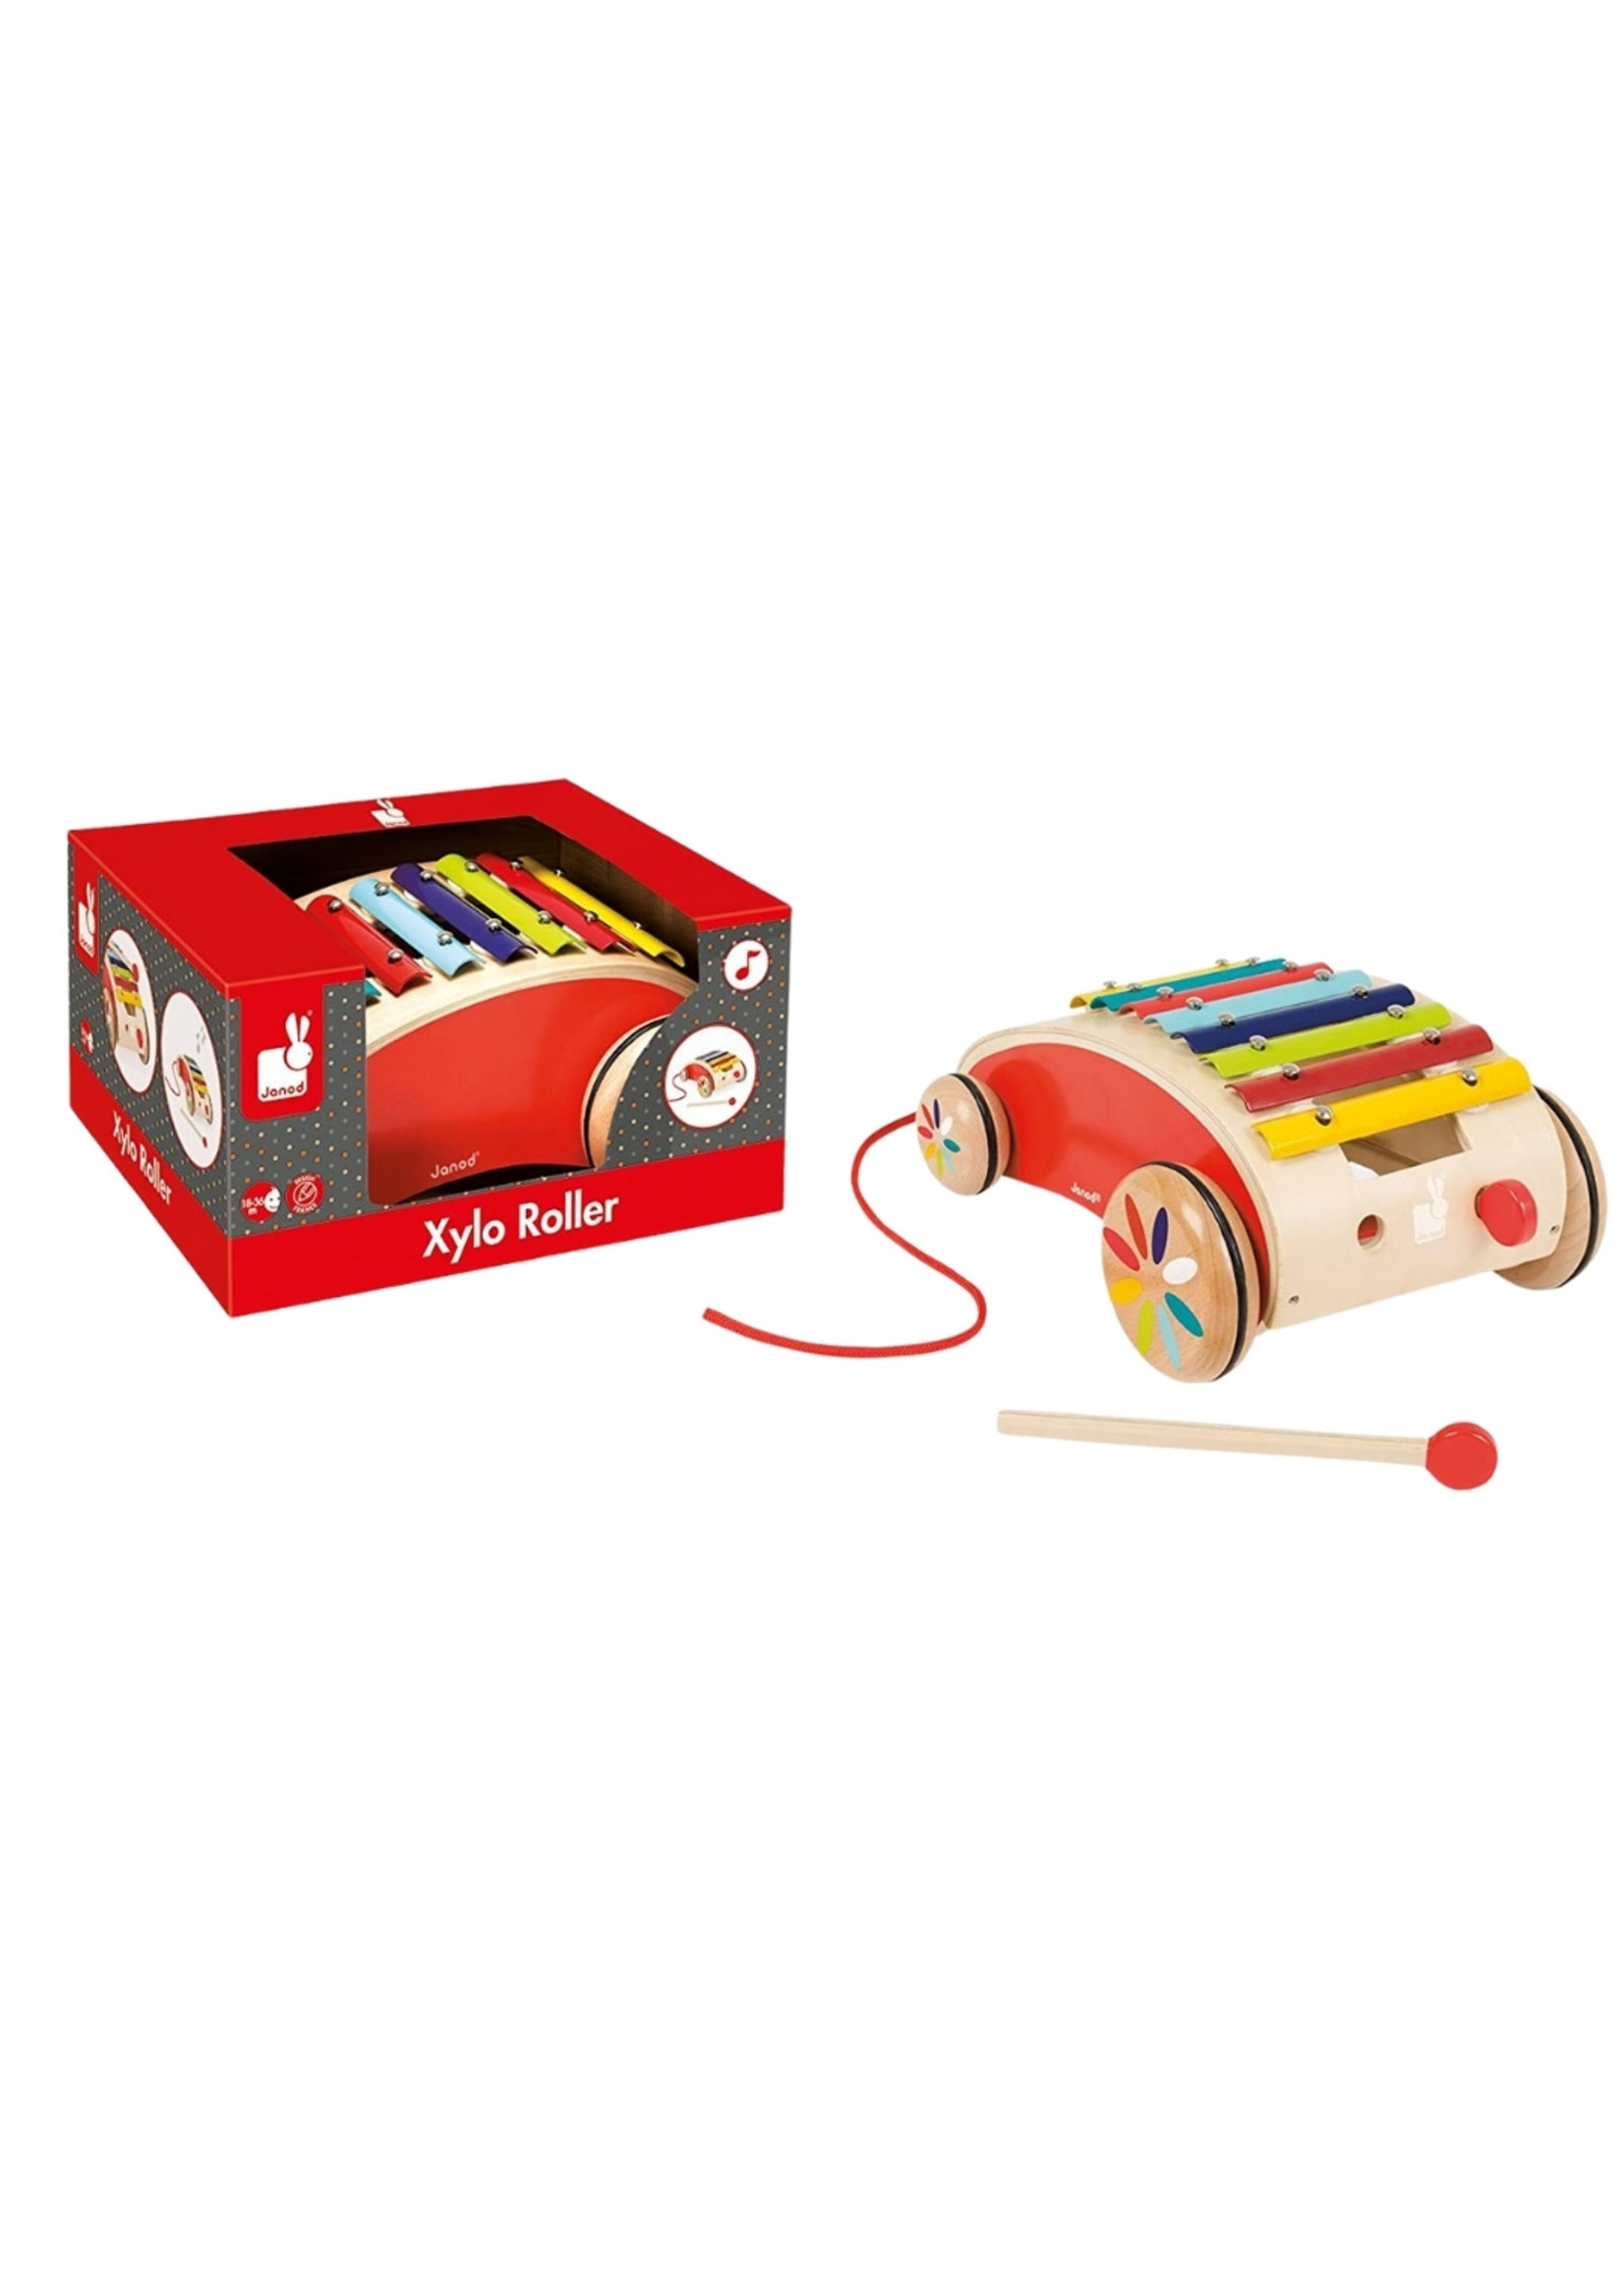 Xylophone Roller Toy